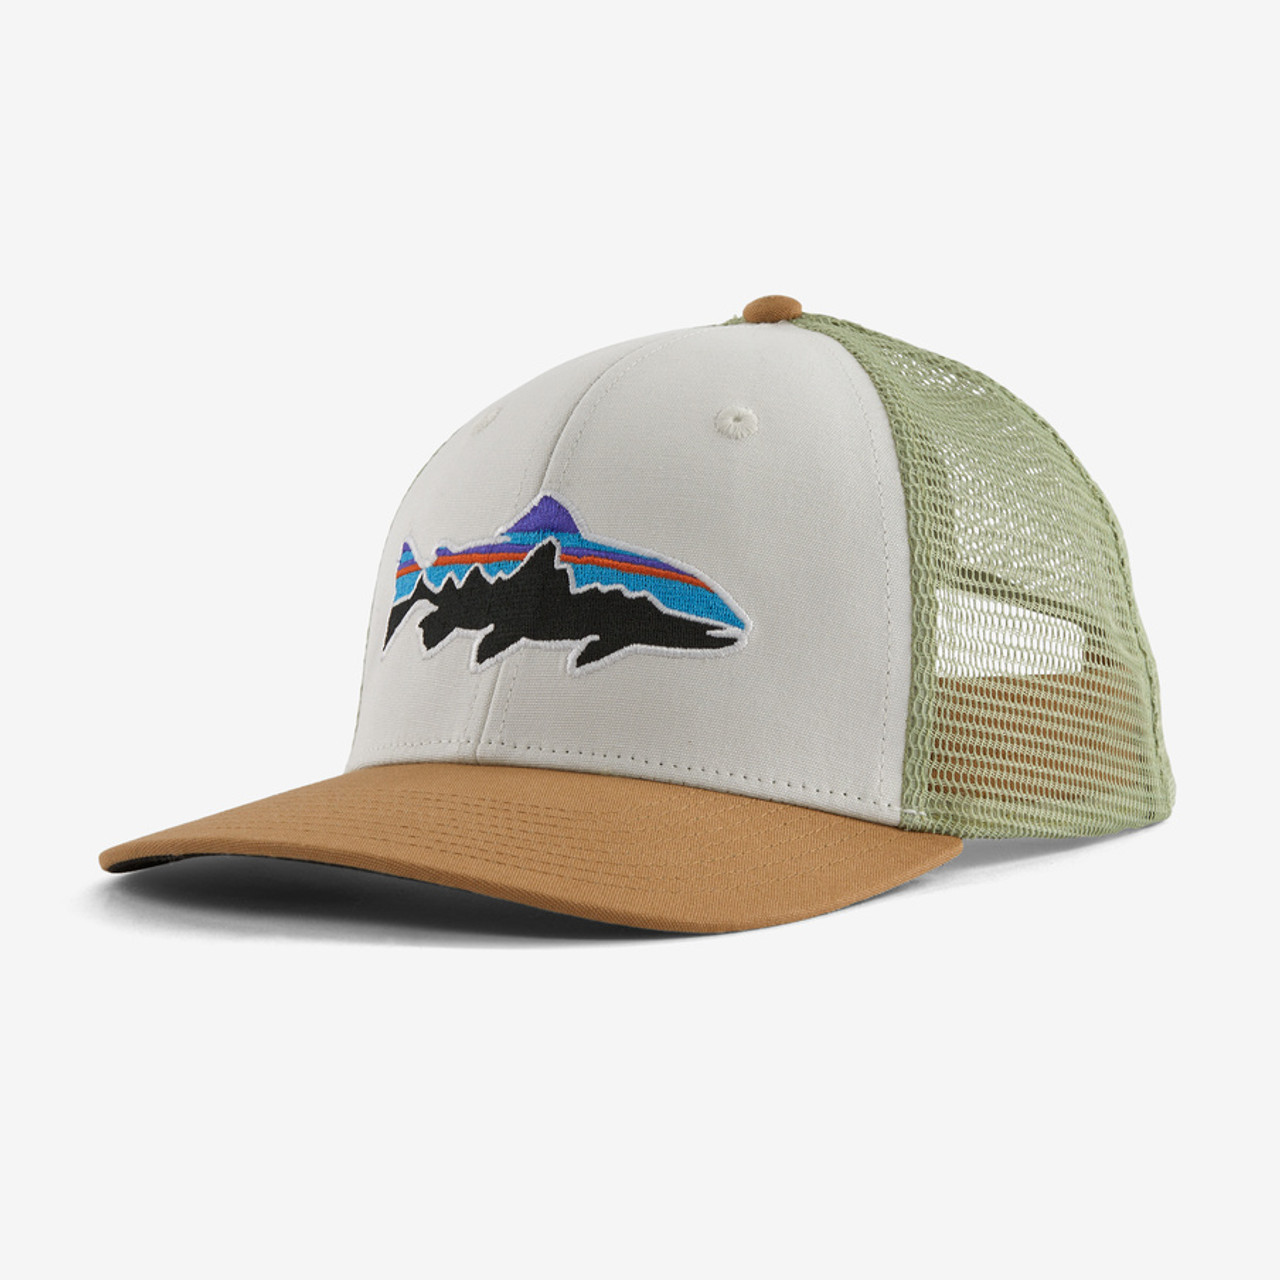 Patagonia Fitz Roy Trout Trucker Hat: White w/ Classic Tan